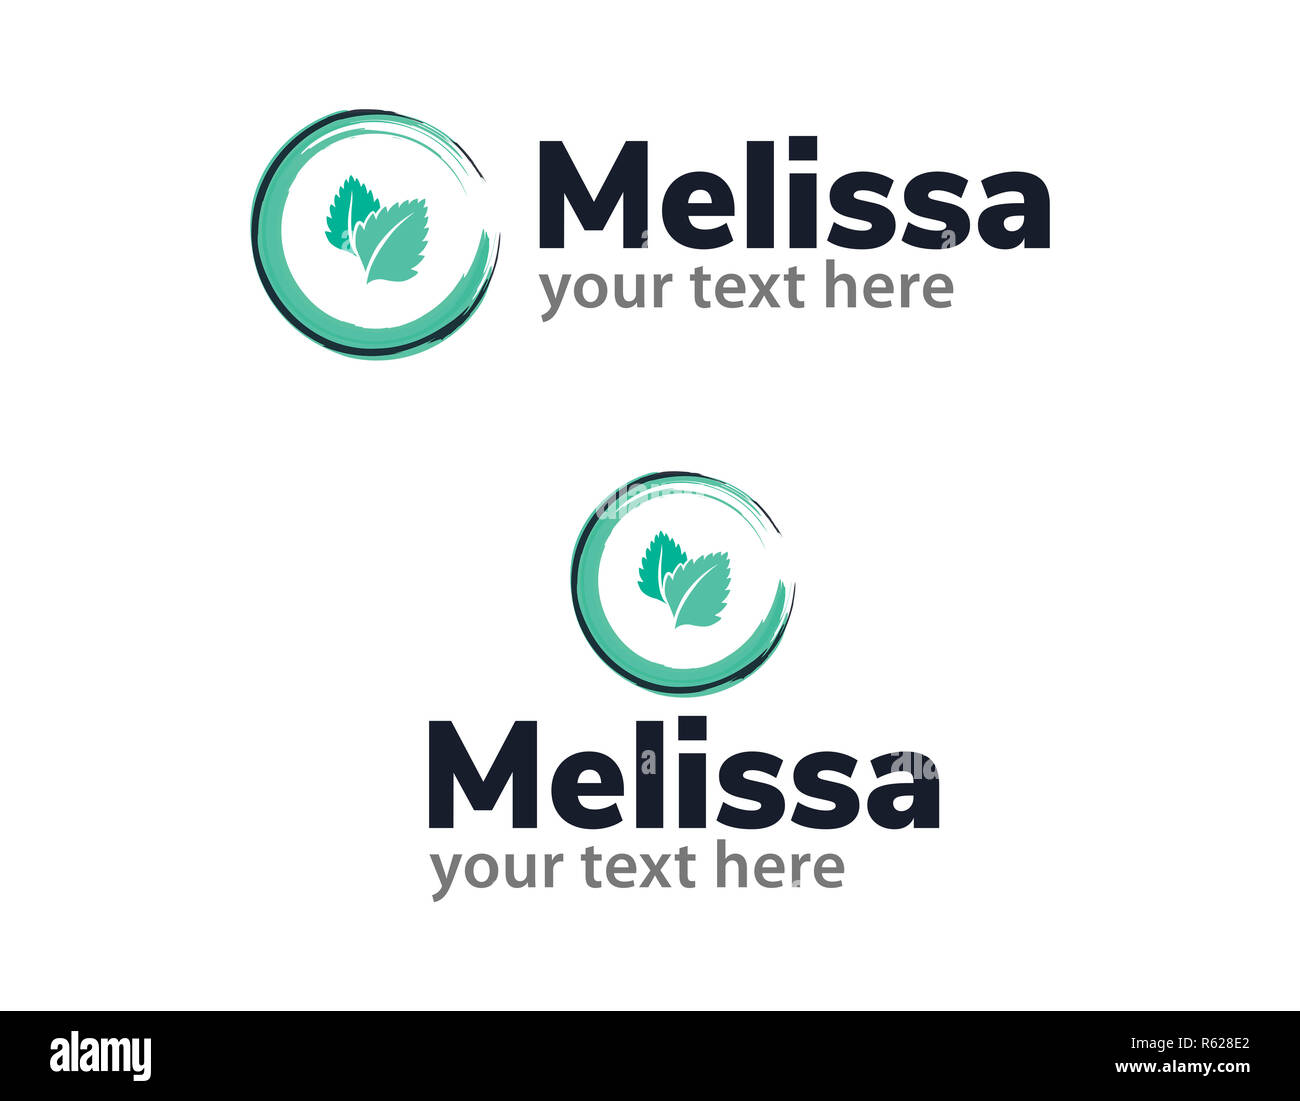 Melissa Logo Vector Template. Melissa leaves into the rounded splash. Mint  color Logo Design. Orizontal and vertical version of logo concerp with Meli  Stock Photo - Alamy